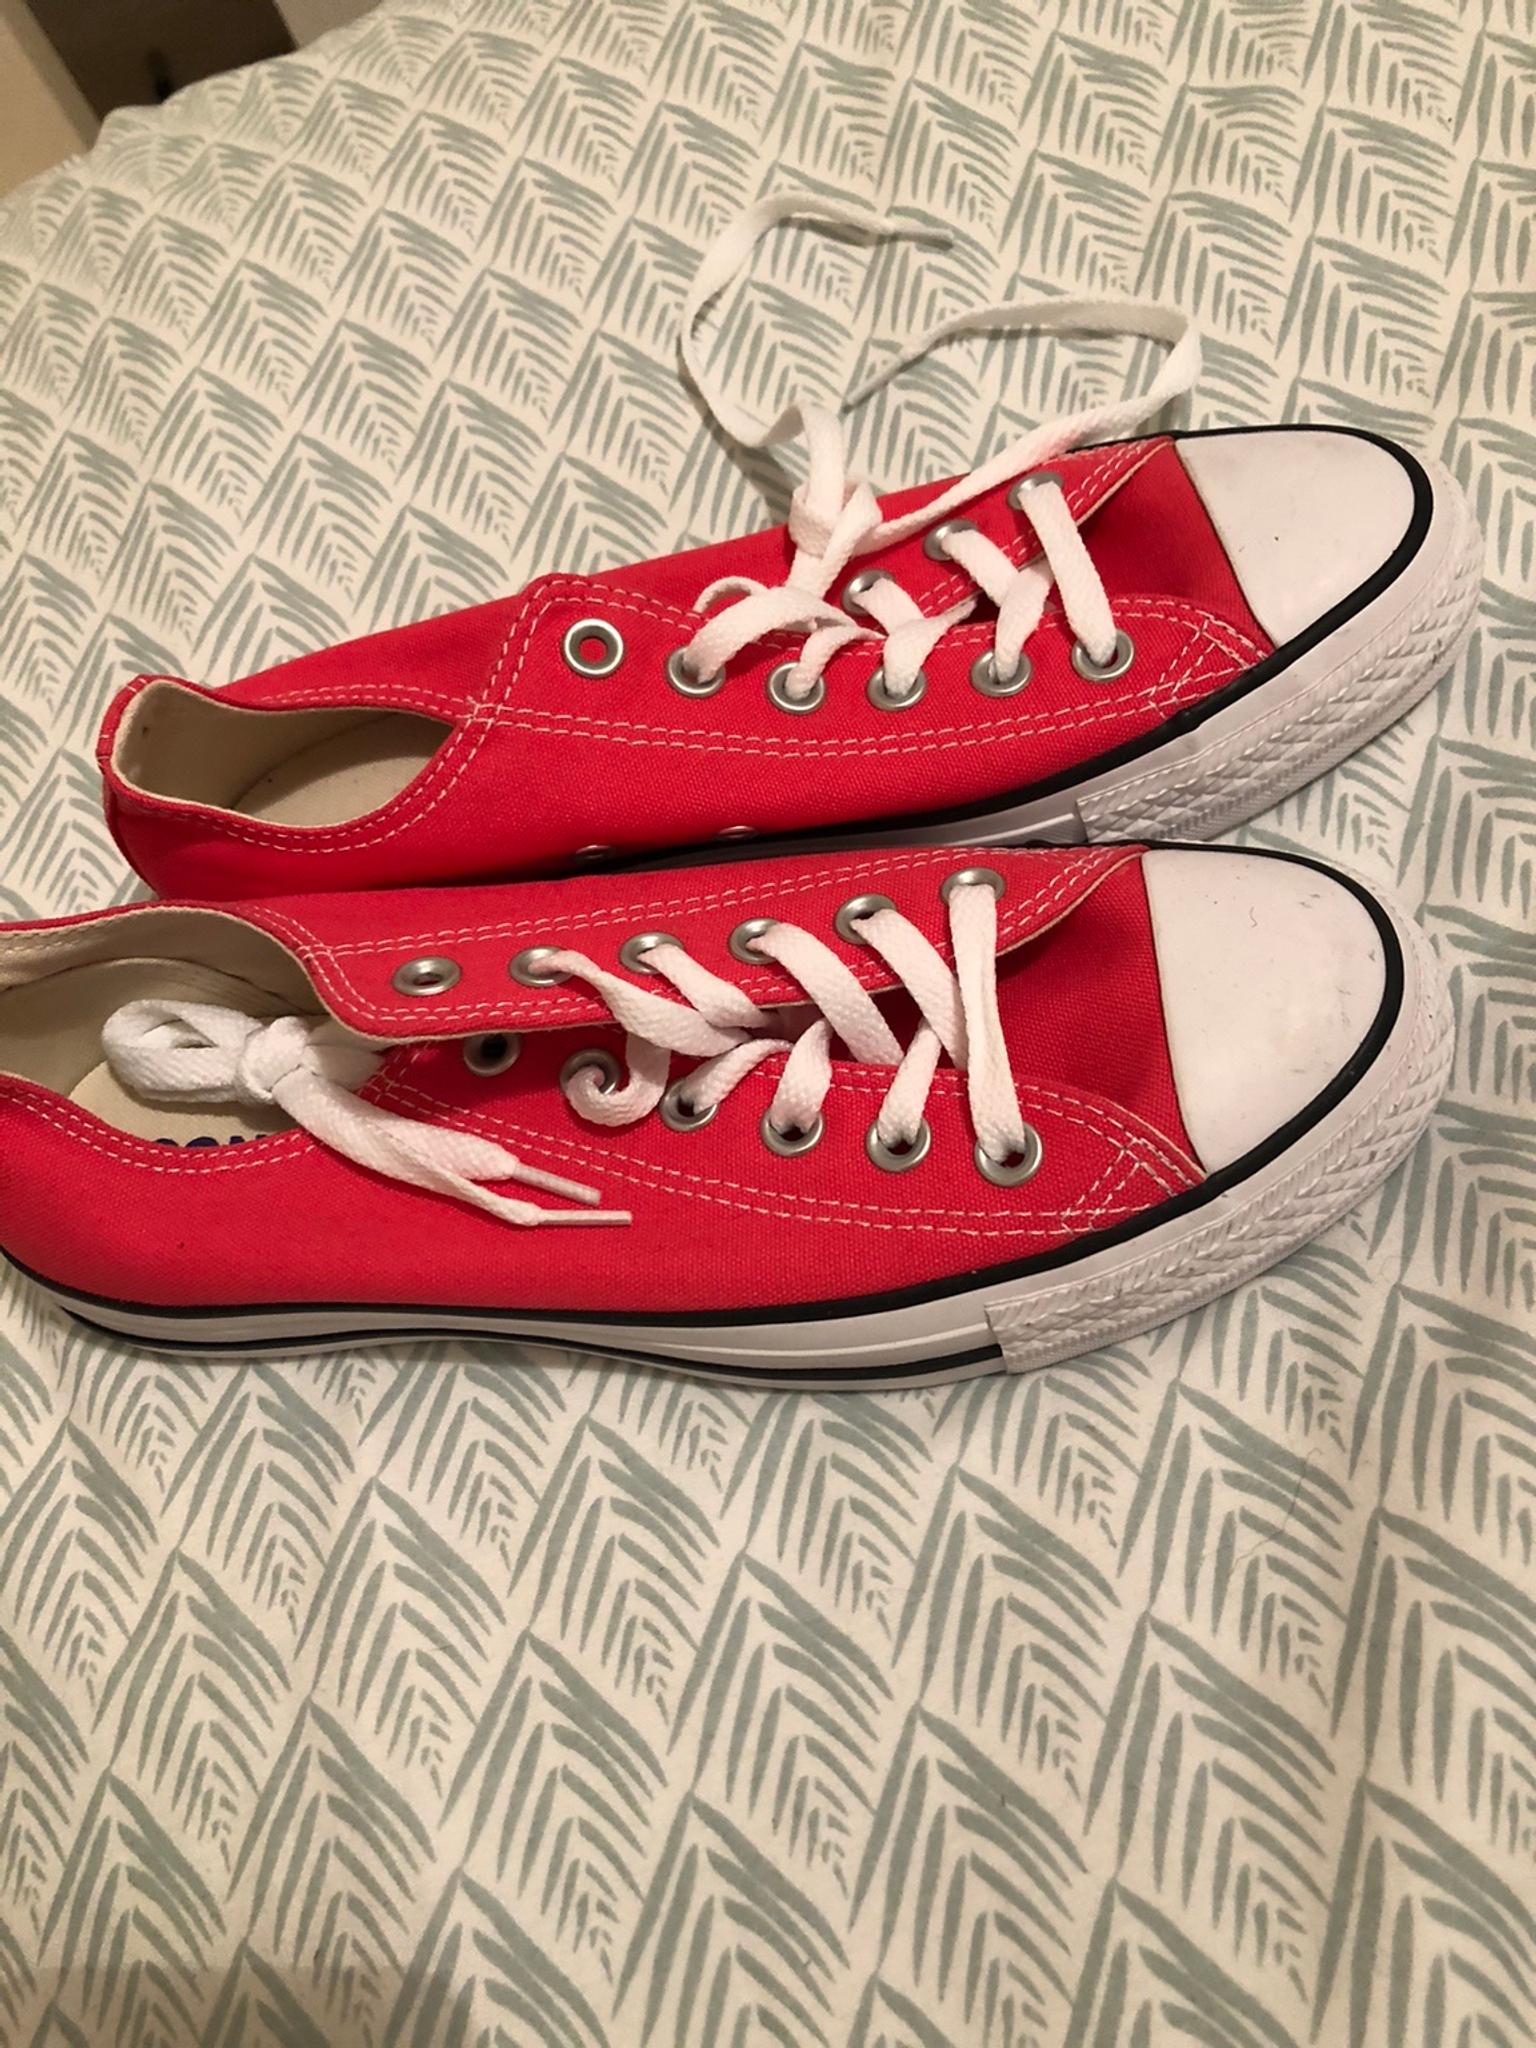 New pink ladies converse trainers size 5.5 UK in SE16 Southwark for £23.00  for sale | Shpock